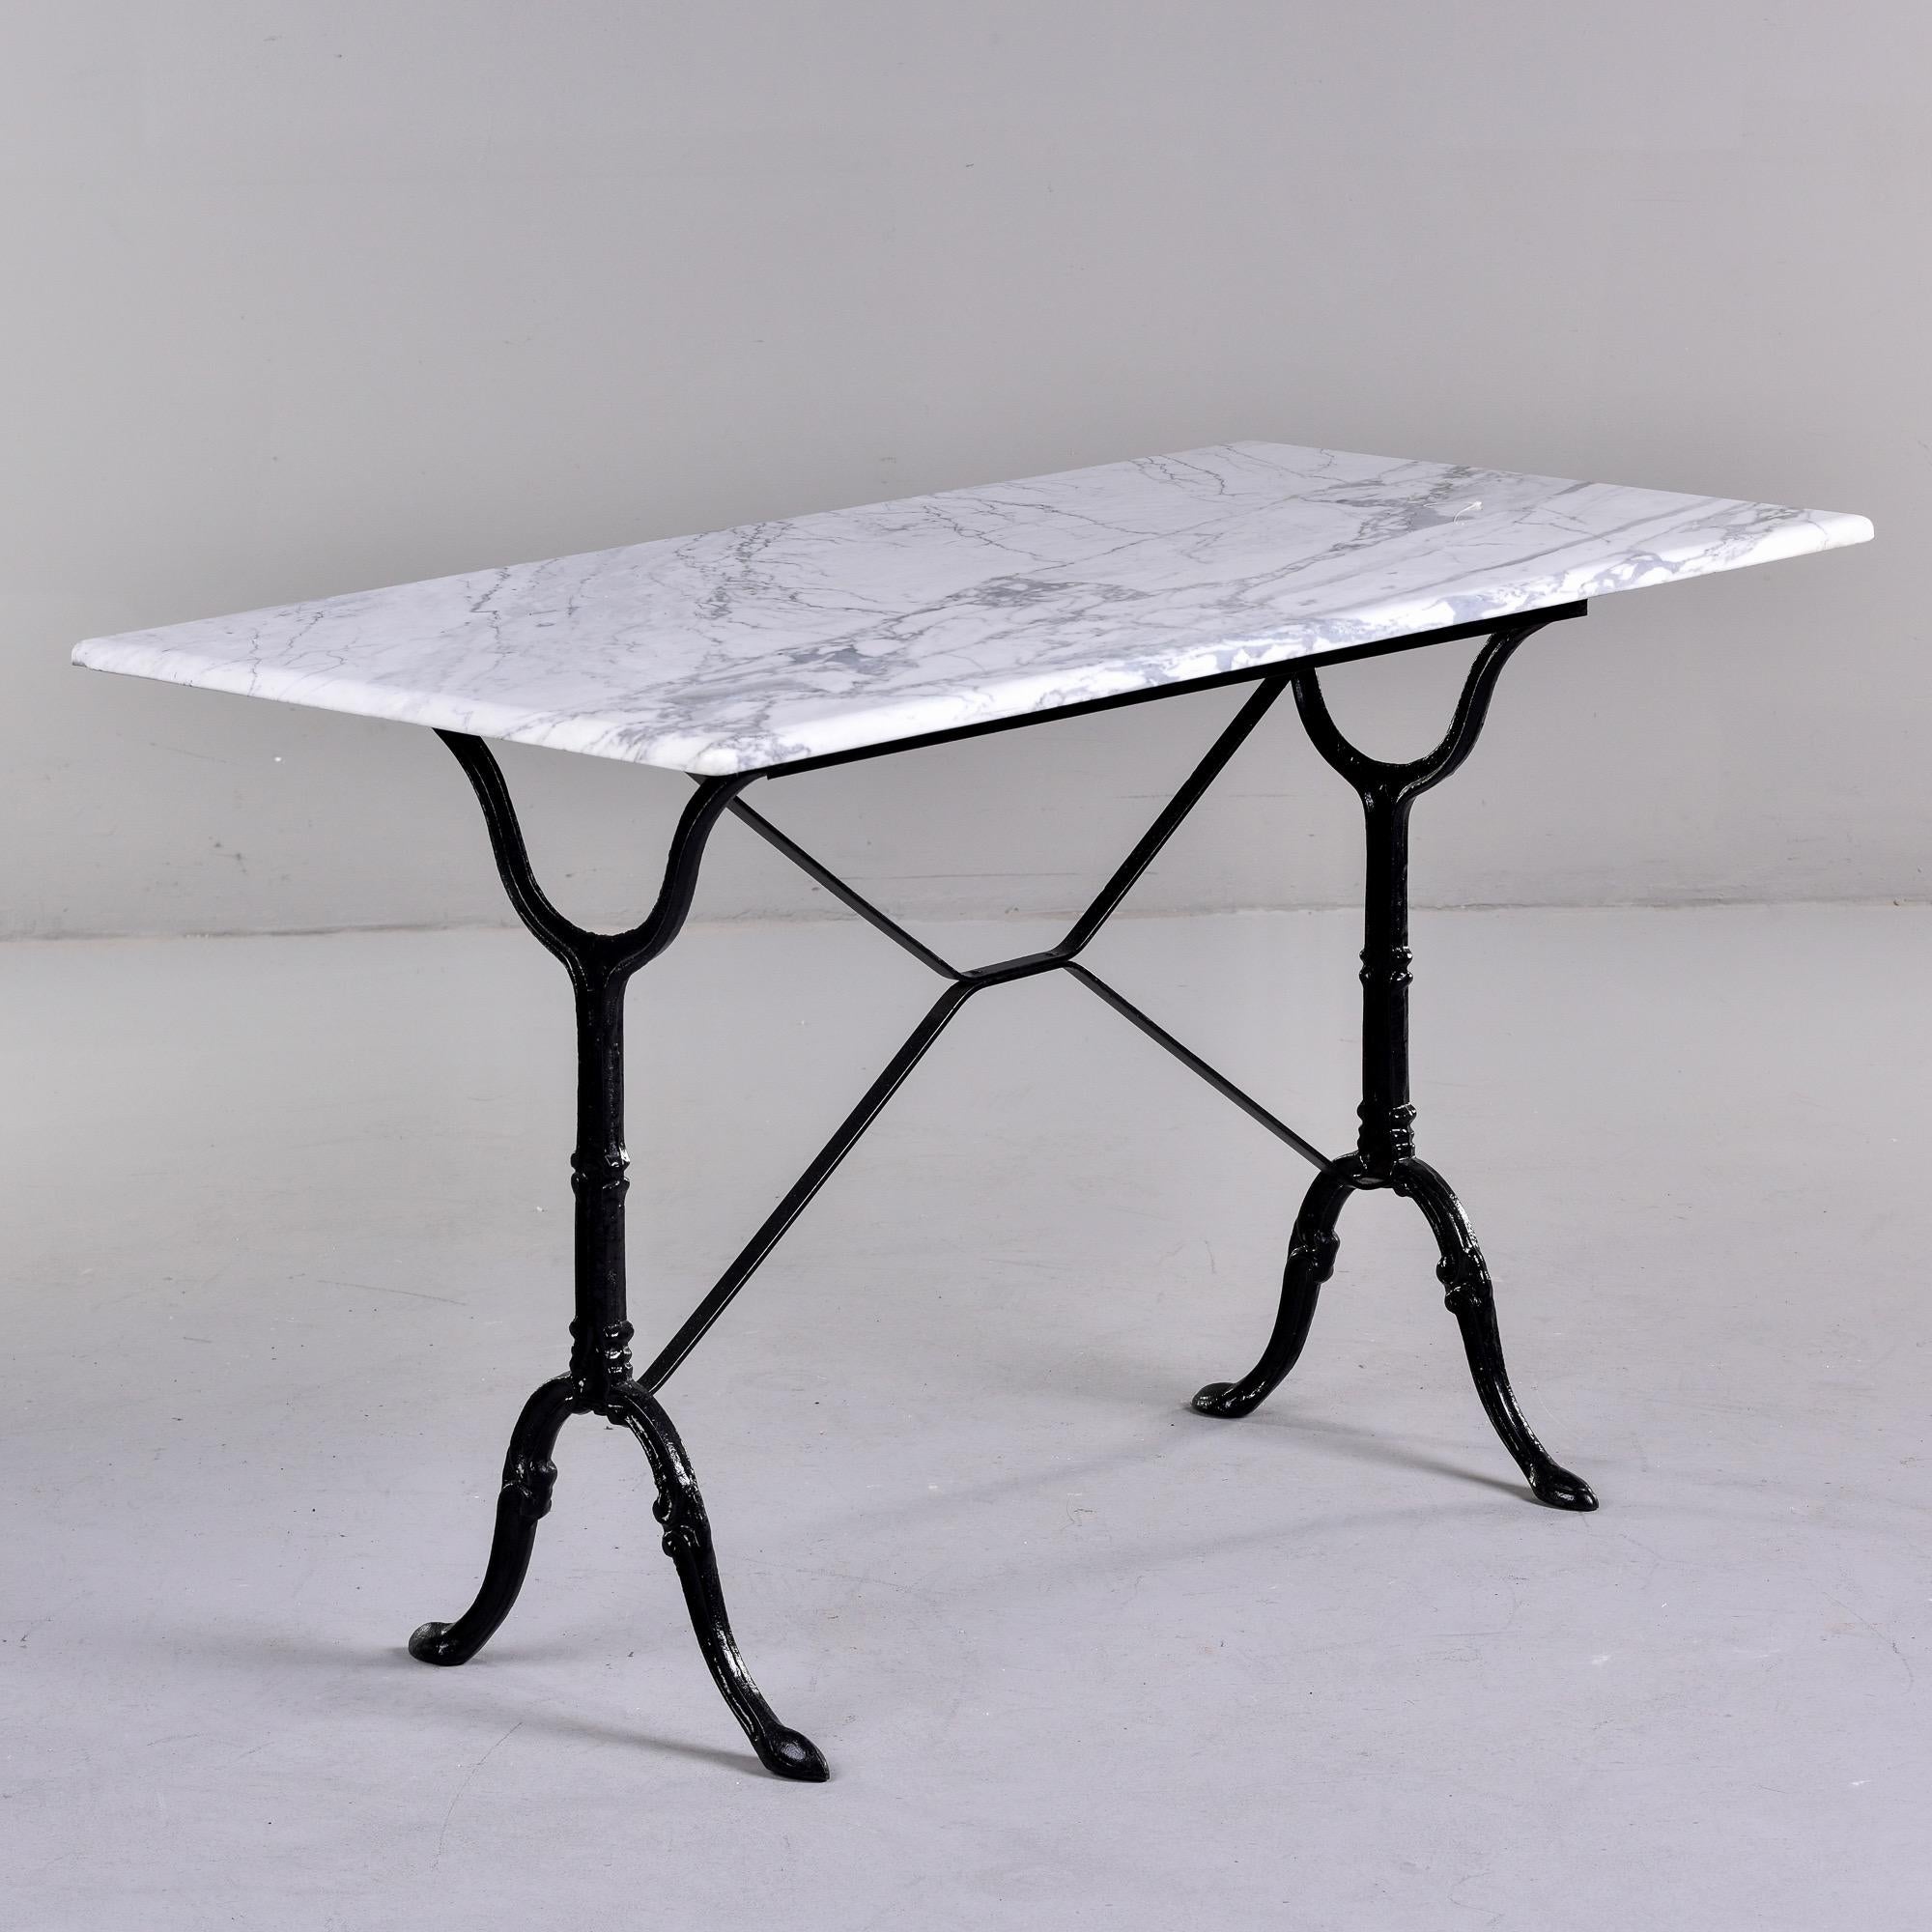 Circa 1920s French bistro table features a classically styled iron base with black painted finish and a rectangular white carrara marble top. Top has finished and polished edges all around. One corner has a small flake on underside - see detail